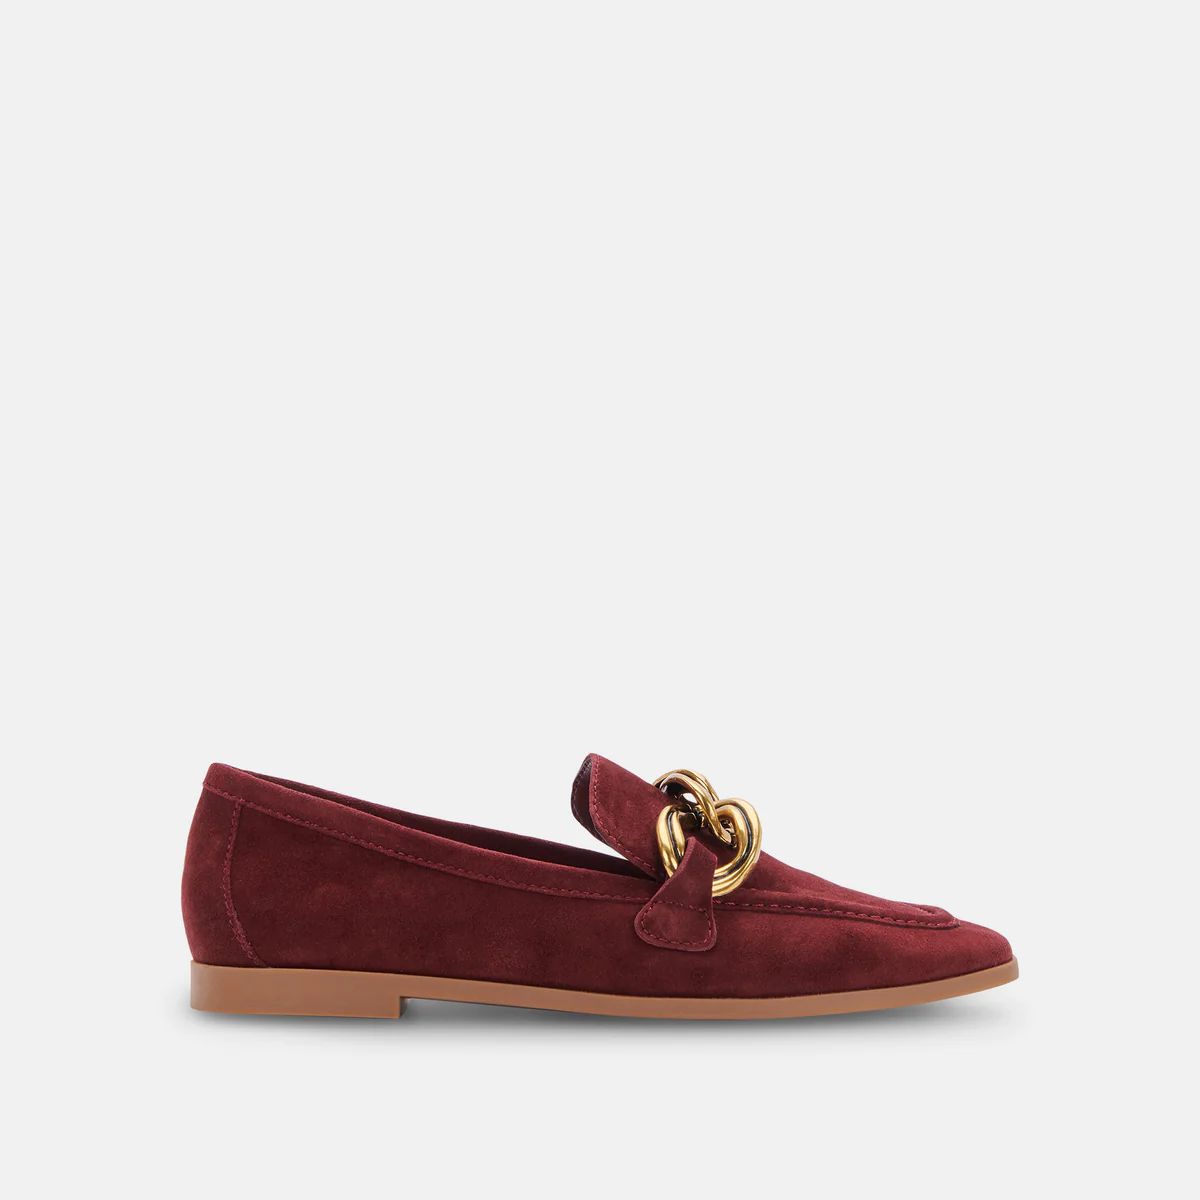 CRYS LOAFERS MAROON SUEDE | DolceVita.com